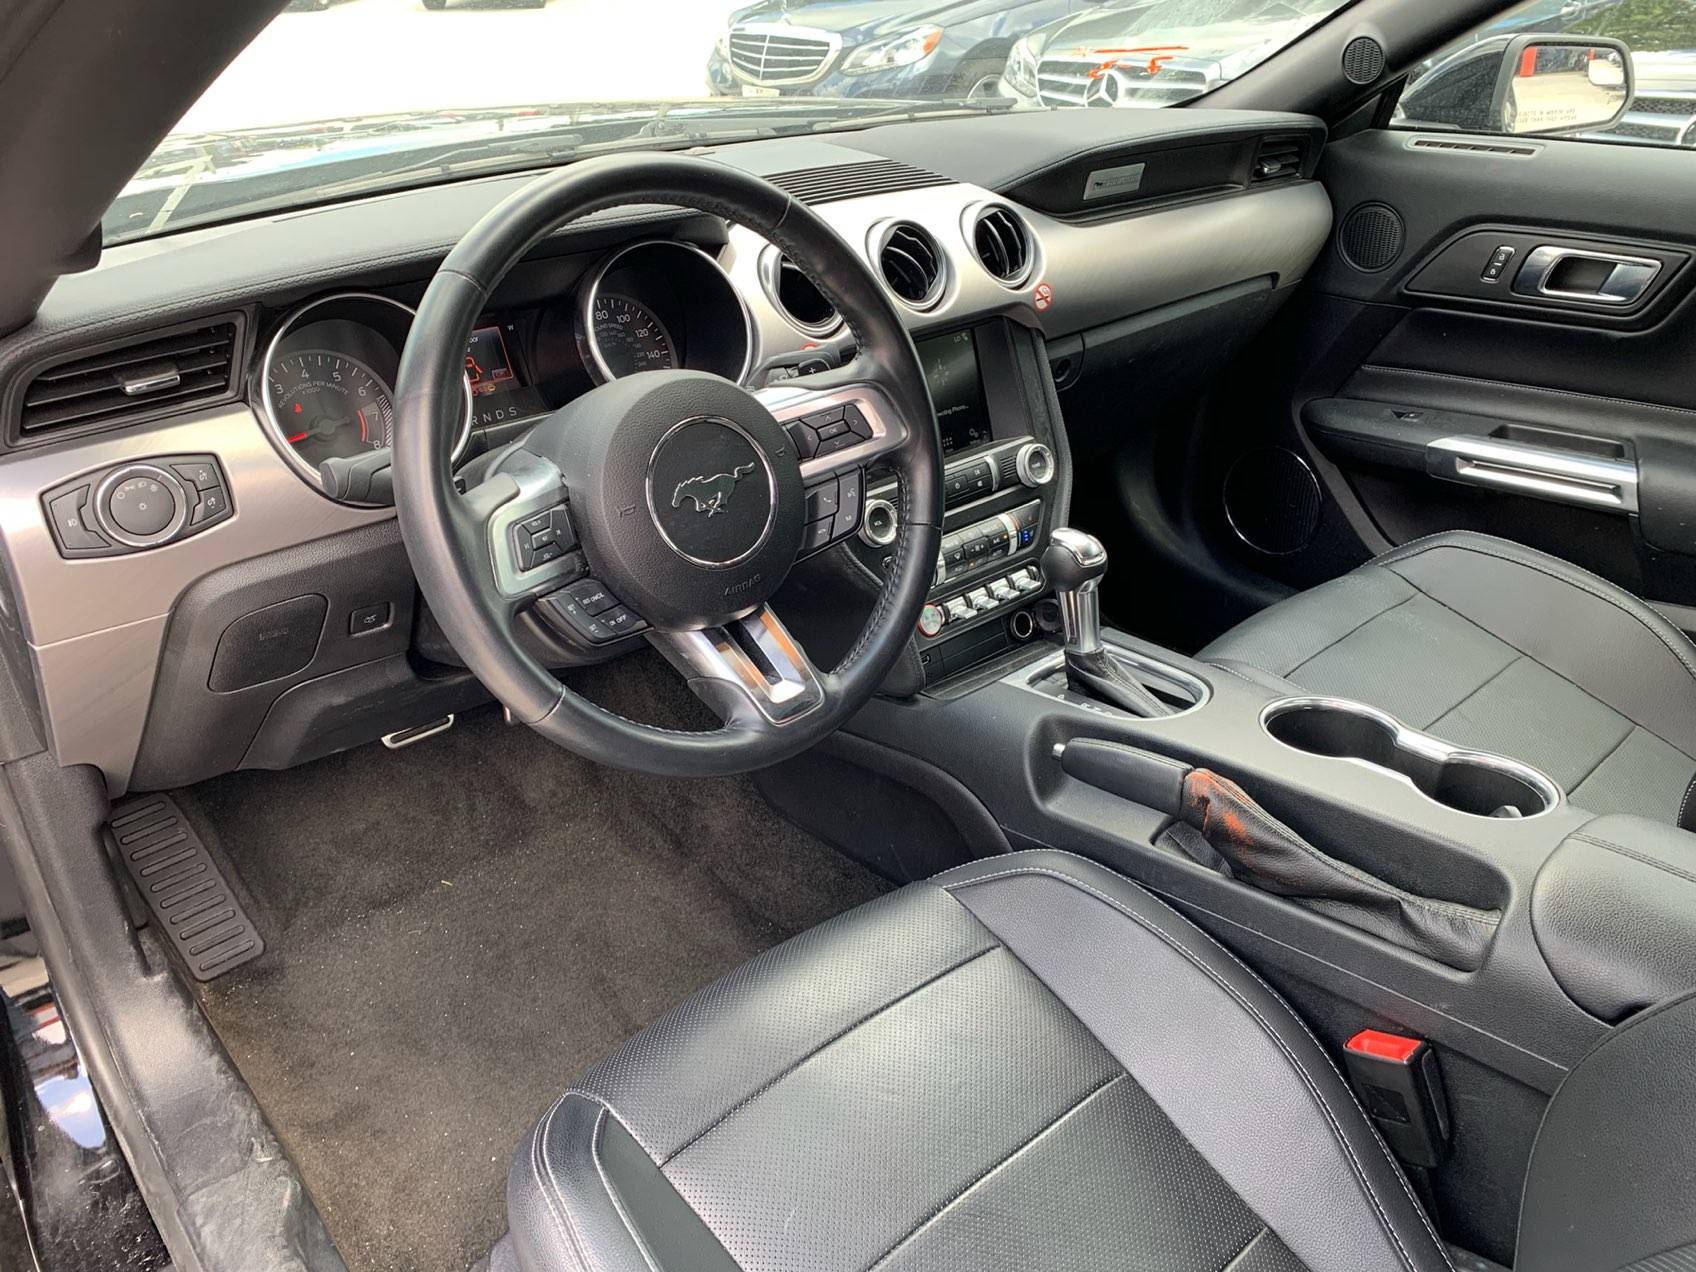 Florida Fine Cars - Used FORD MUSTANG 2019 WEST PALM ECOBOOST PREMIUM